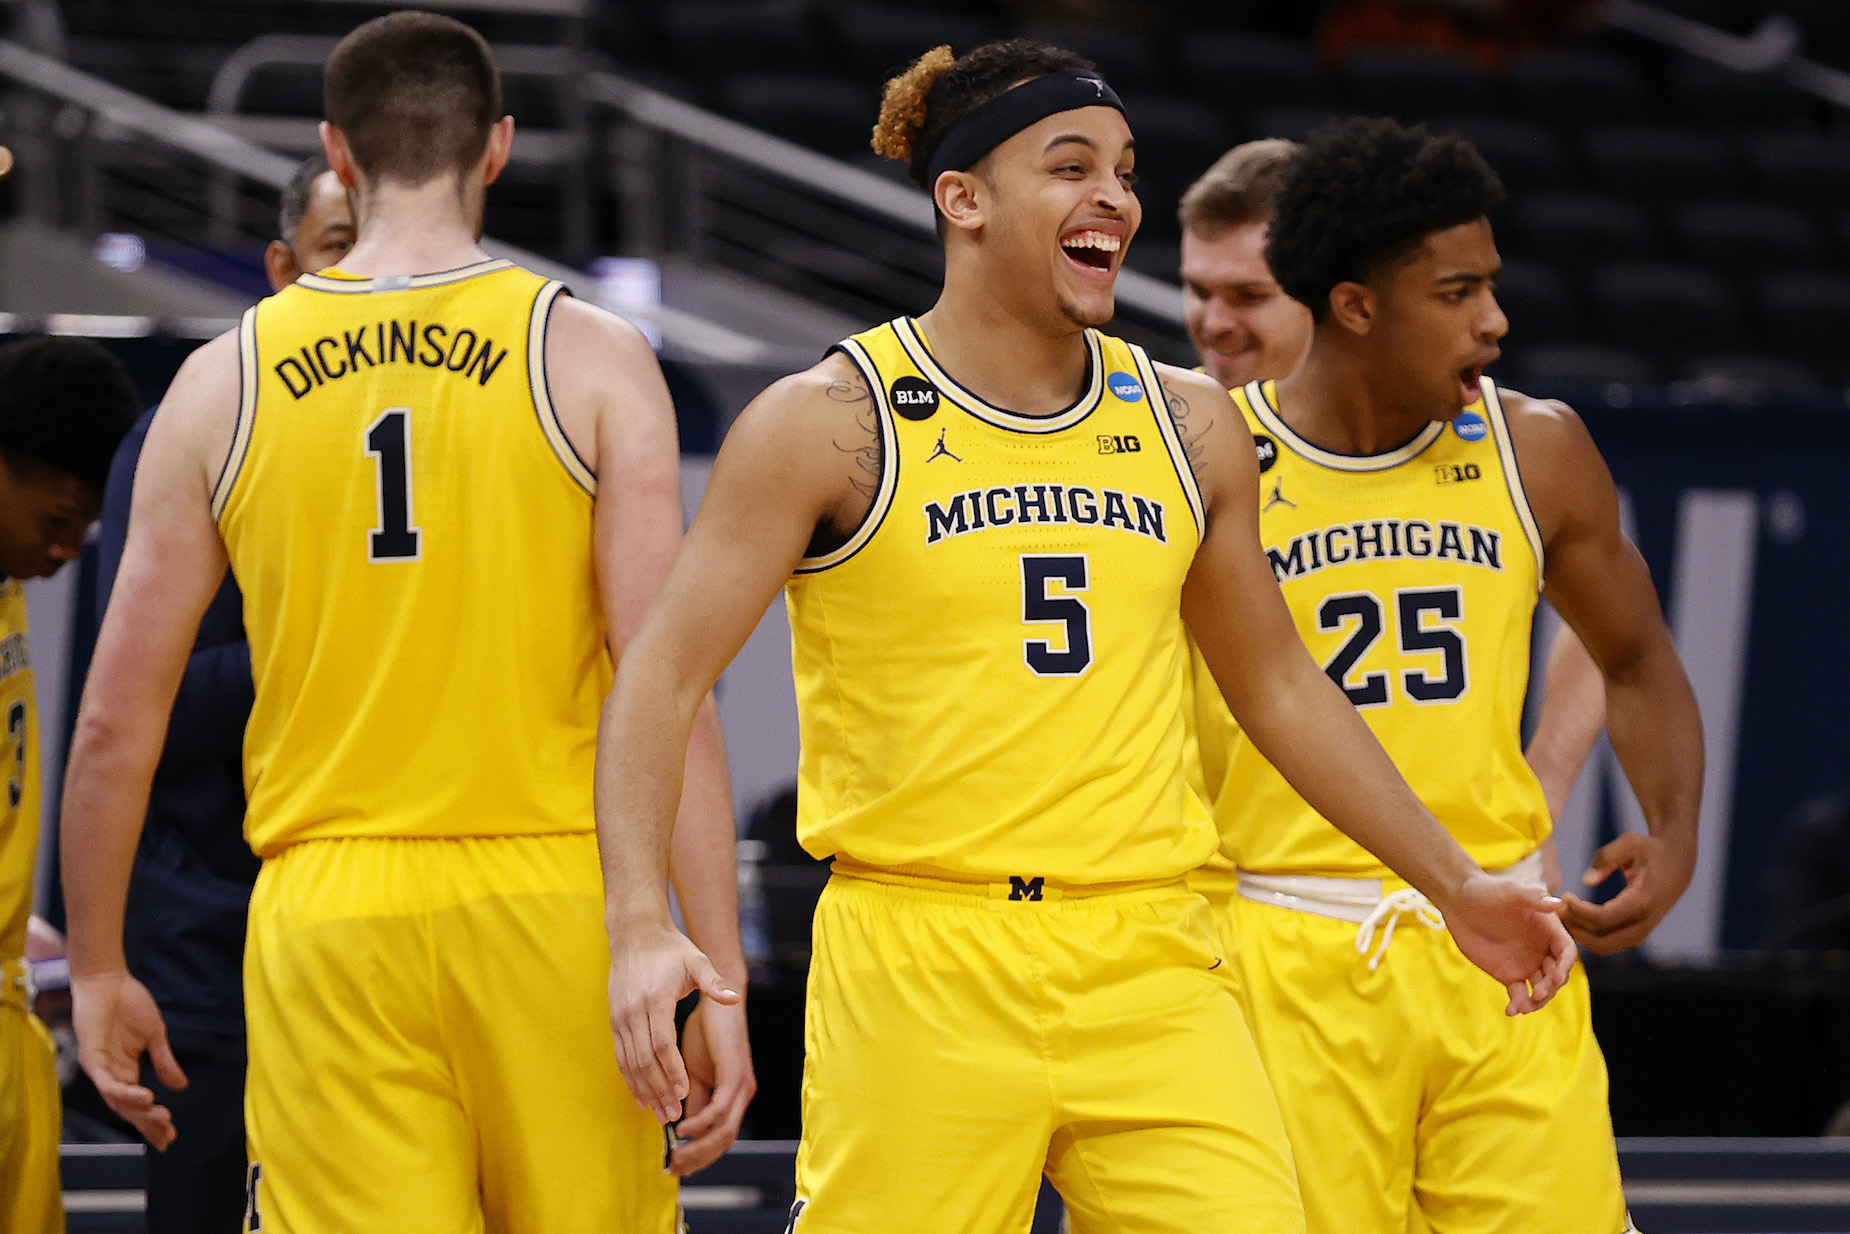 The Michigan Wolverines men's basketball team celebrate a win during the 2021 NCAA Tournament.